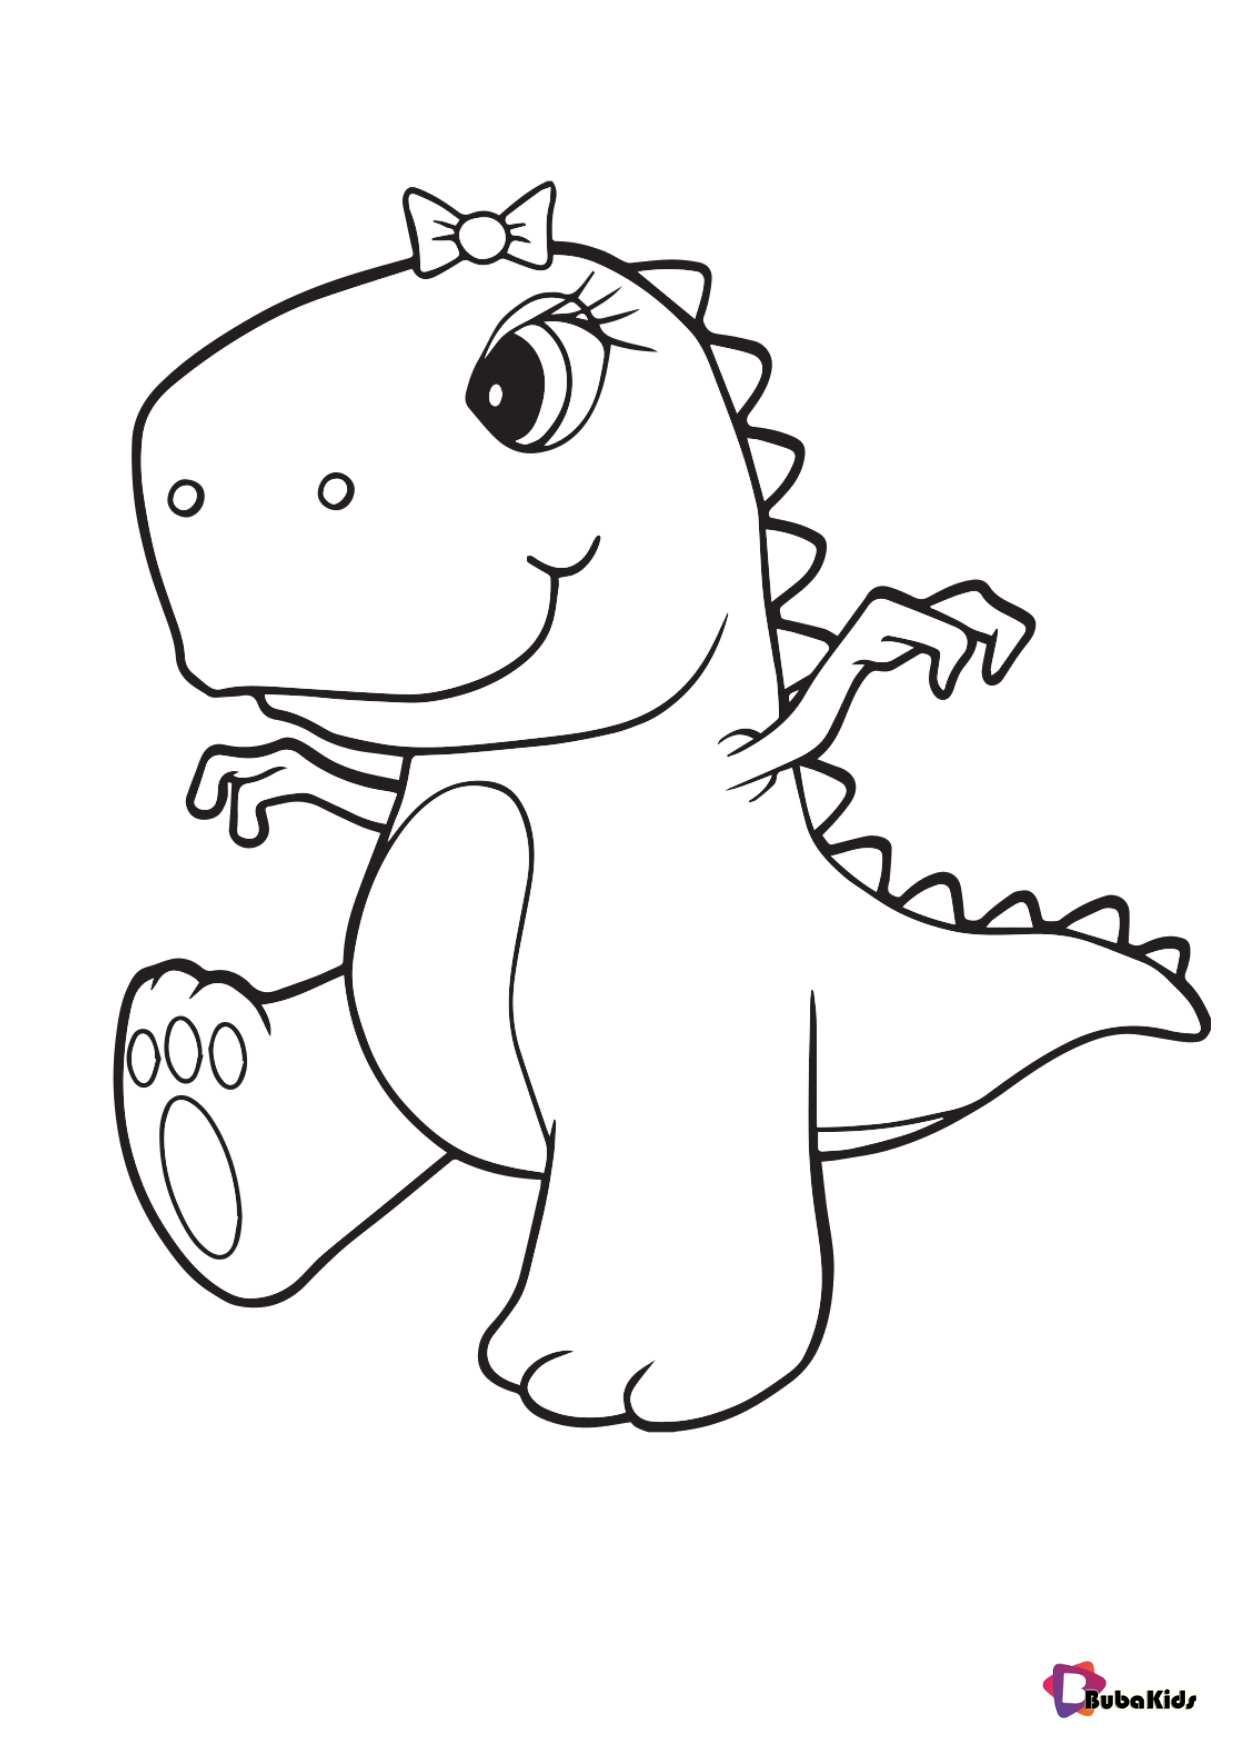 cute-little-dinosaur-baby-colouring-pages-bubakids